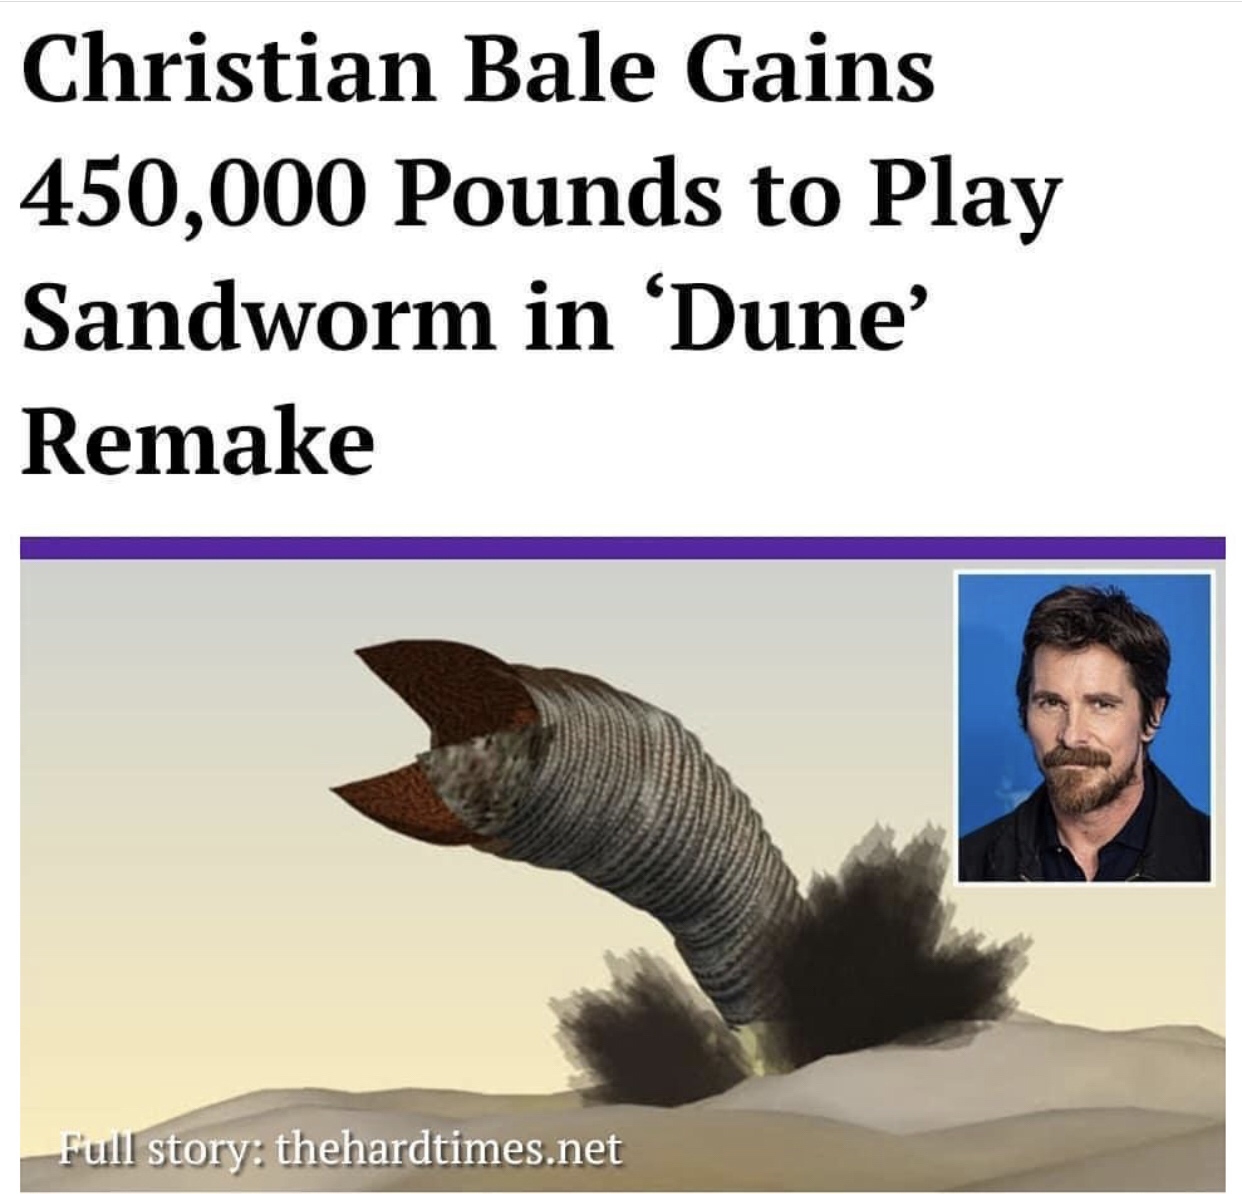 dune sandworm - Christian Bale Gains 450,000 Pounds to Play Sandworm in Dune' Remake Full story thehardtimes.net